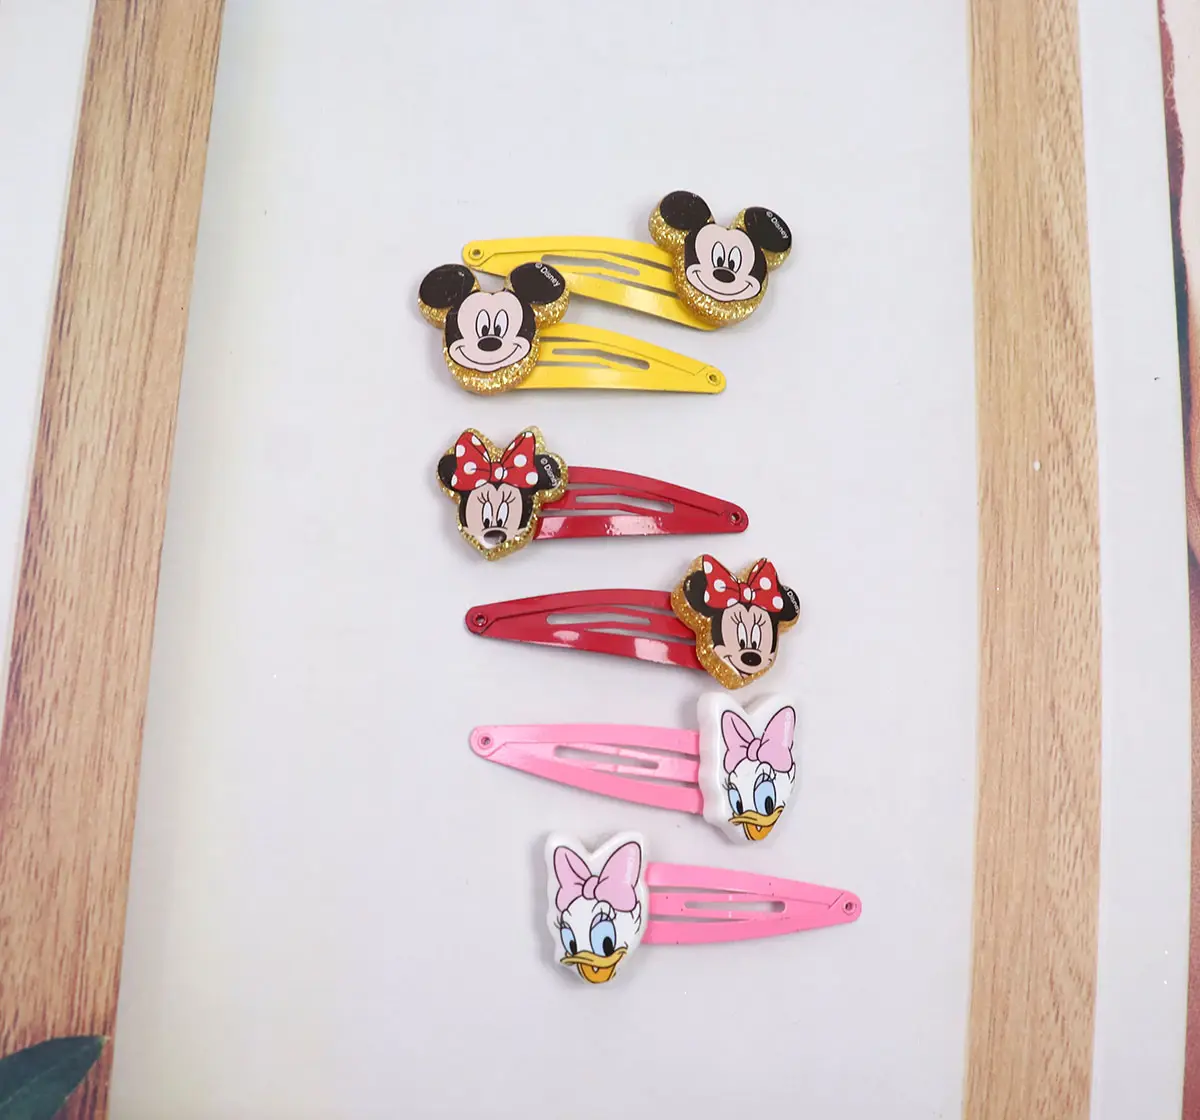 Li'l Diva Disney Mickey, Minnie and Daisy Hair Clips Pack of 6 For Girls Ages 3Y+, Multicolour